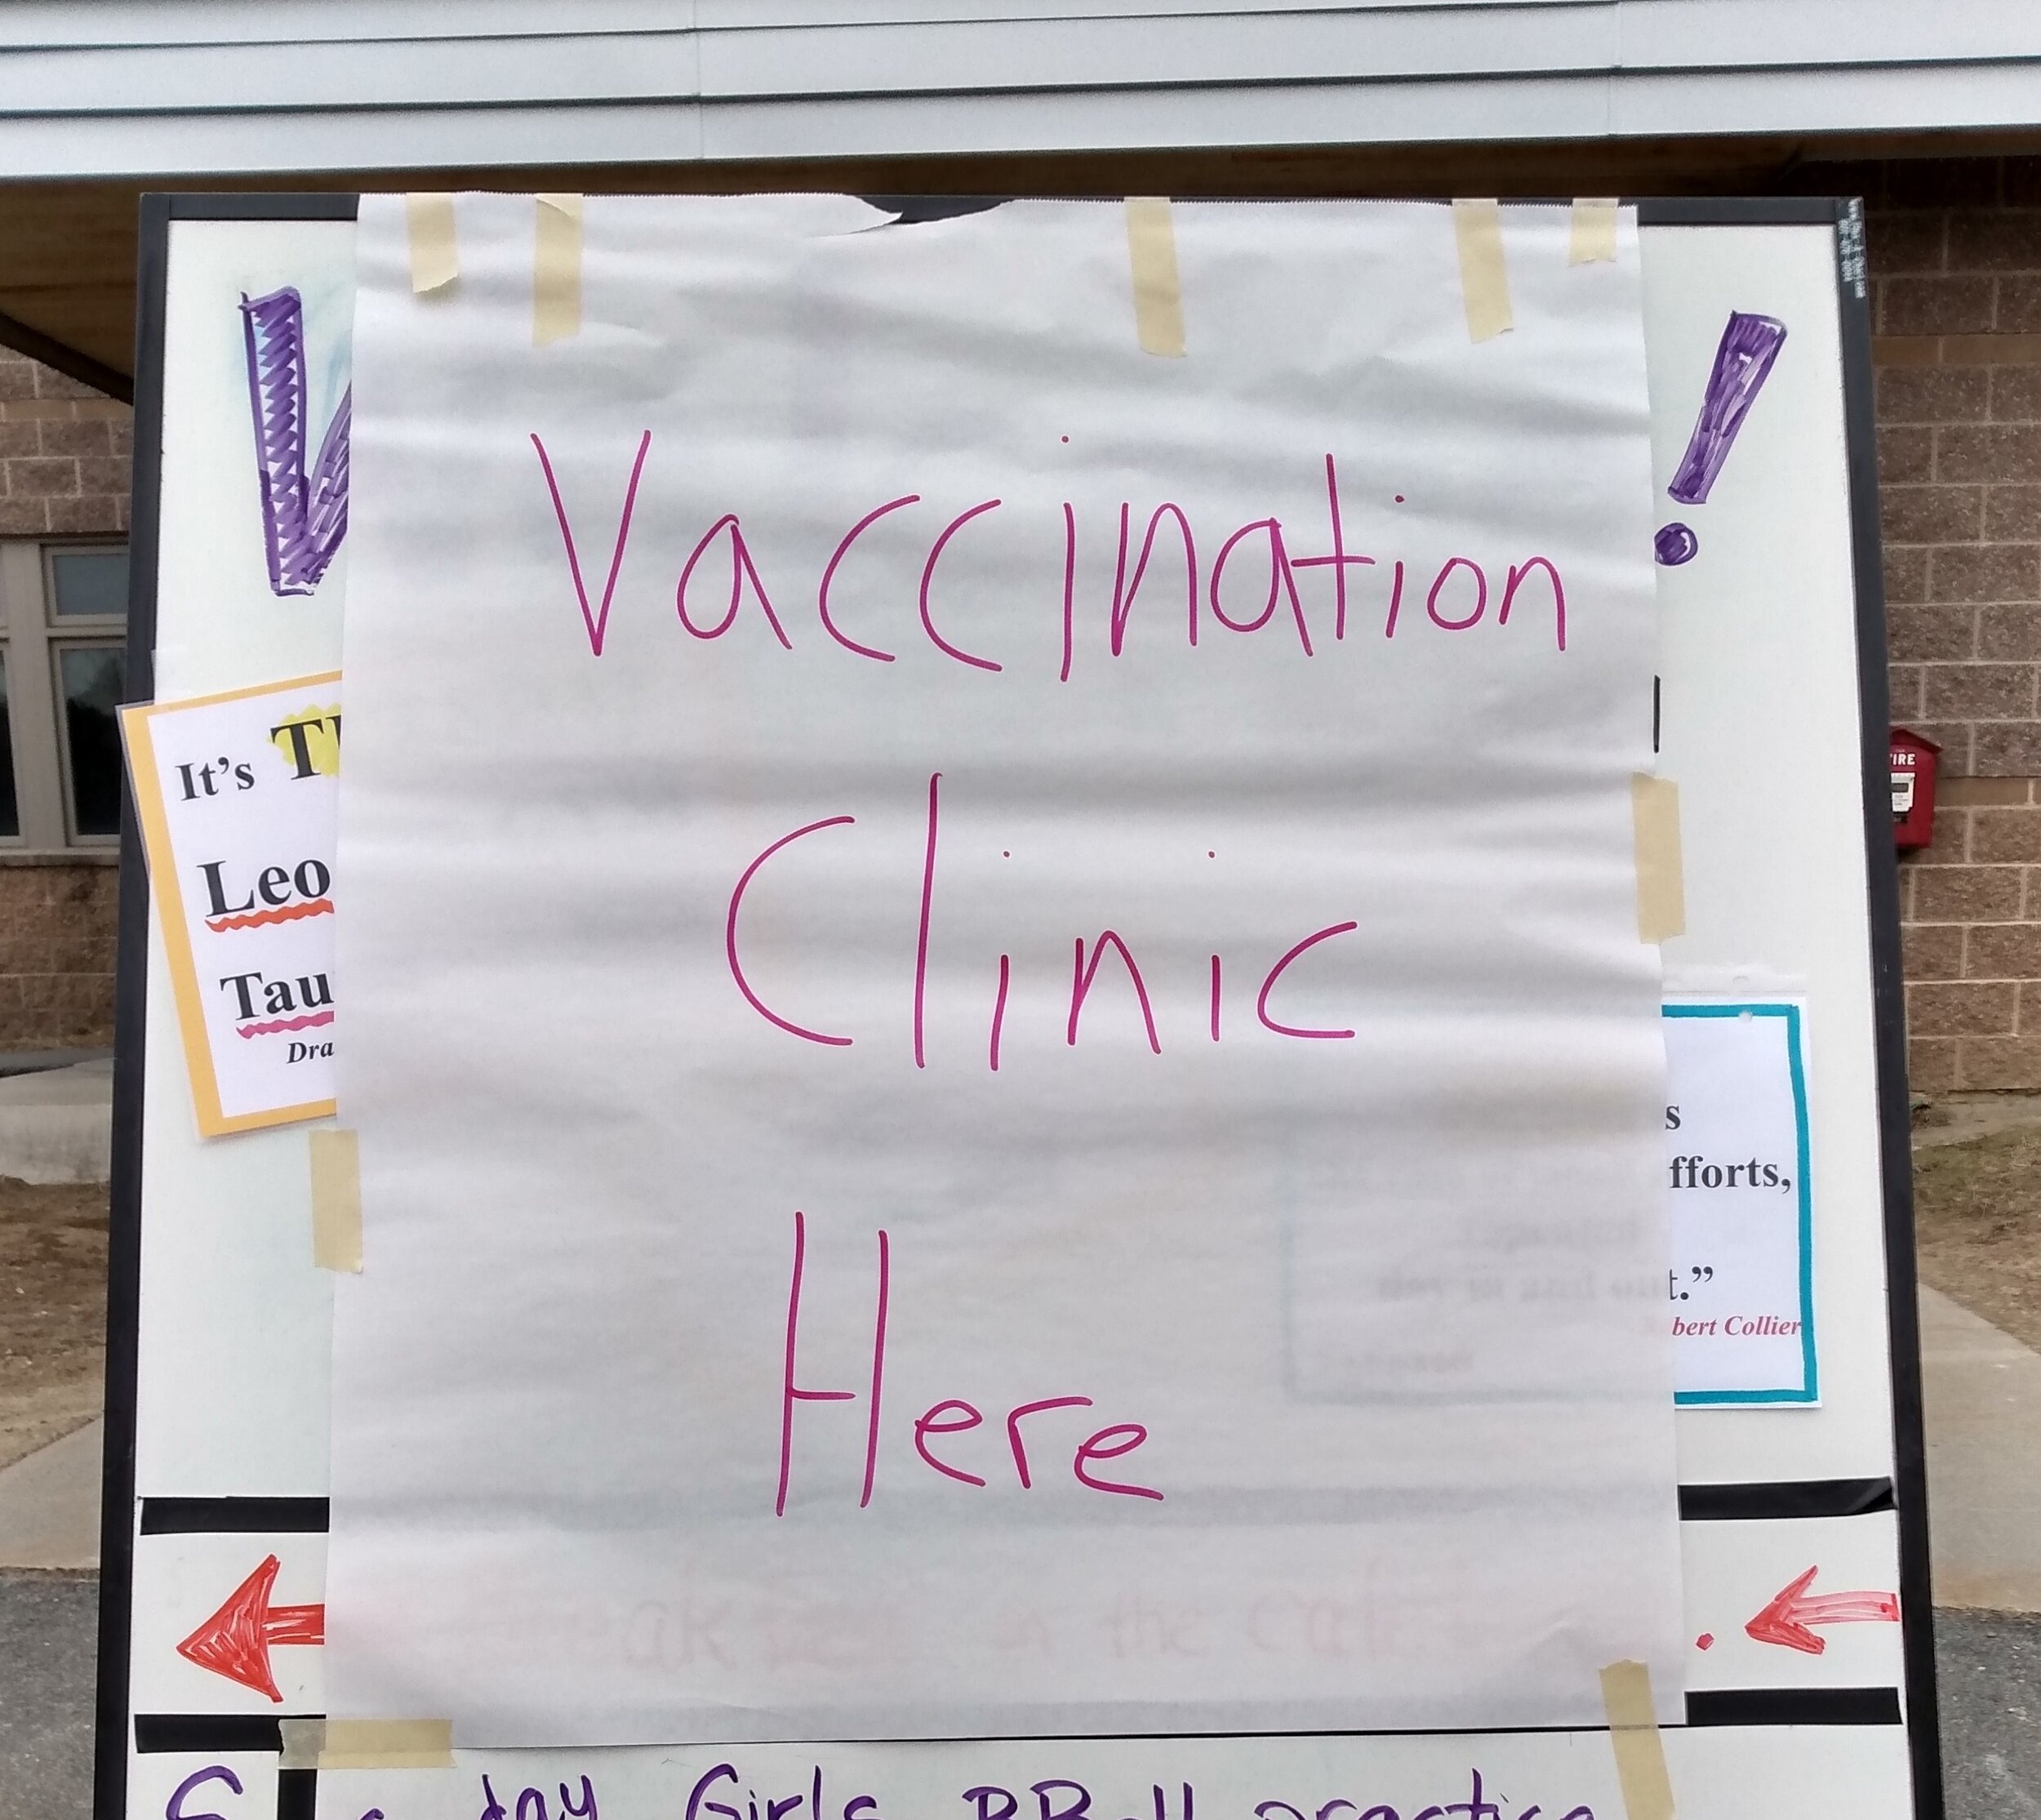 Image of a sign that states “Vaccination Clinic Here.”